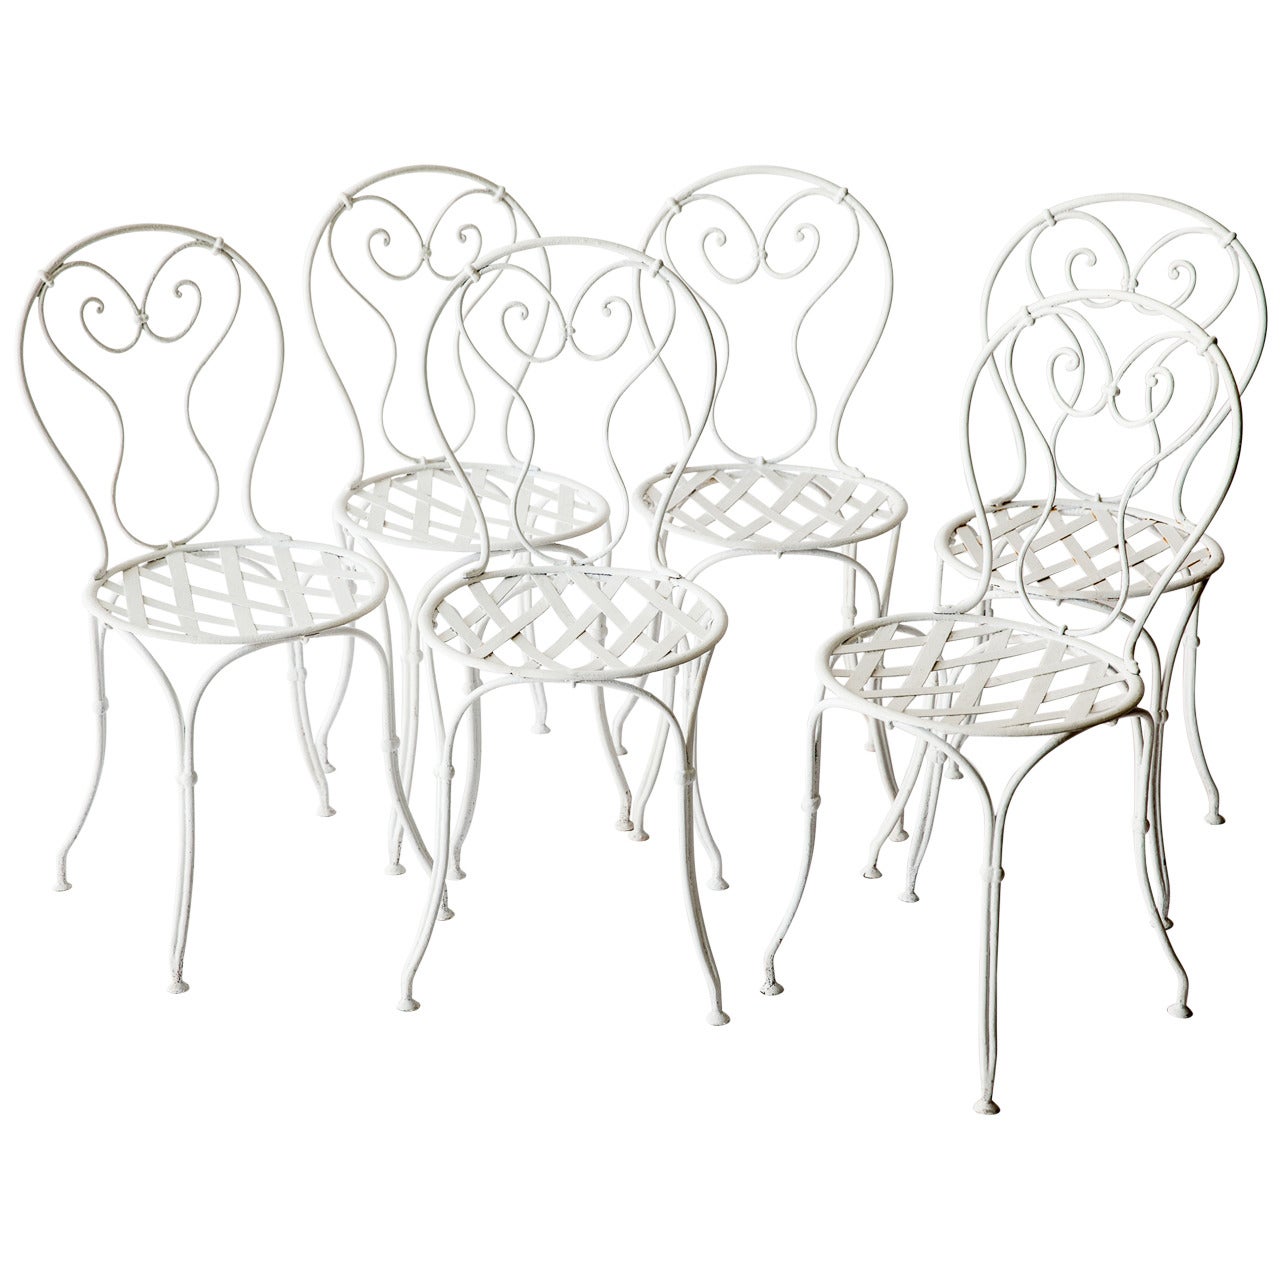 Set of Six Antique French Wrought Iron Garden Chairs, circa 1900-1920